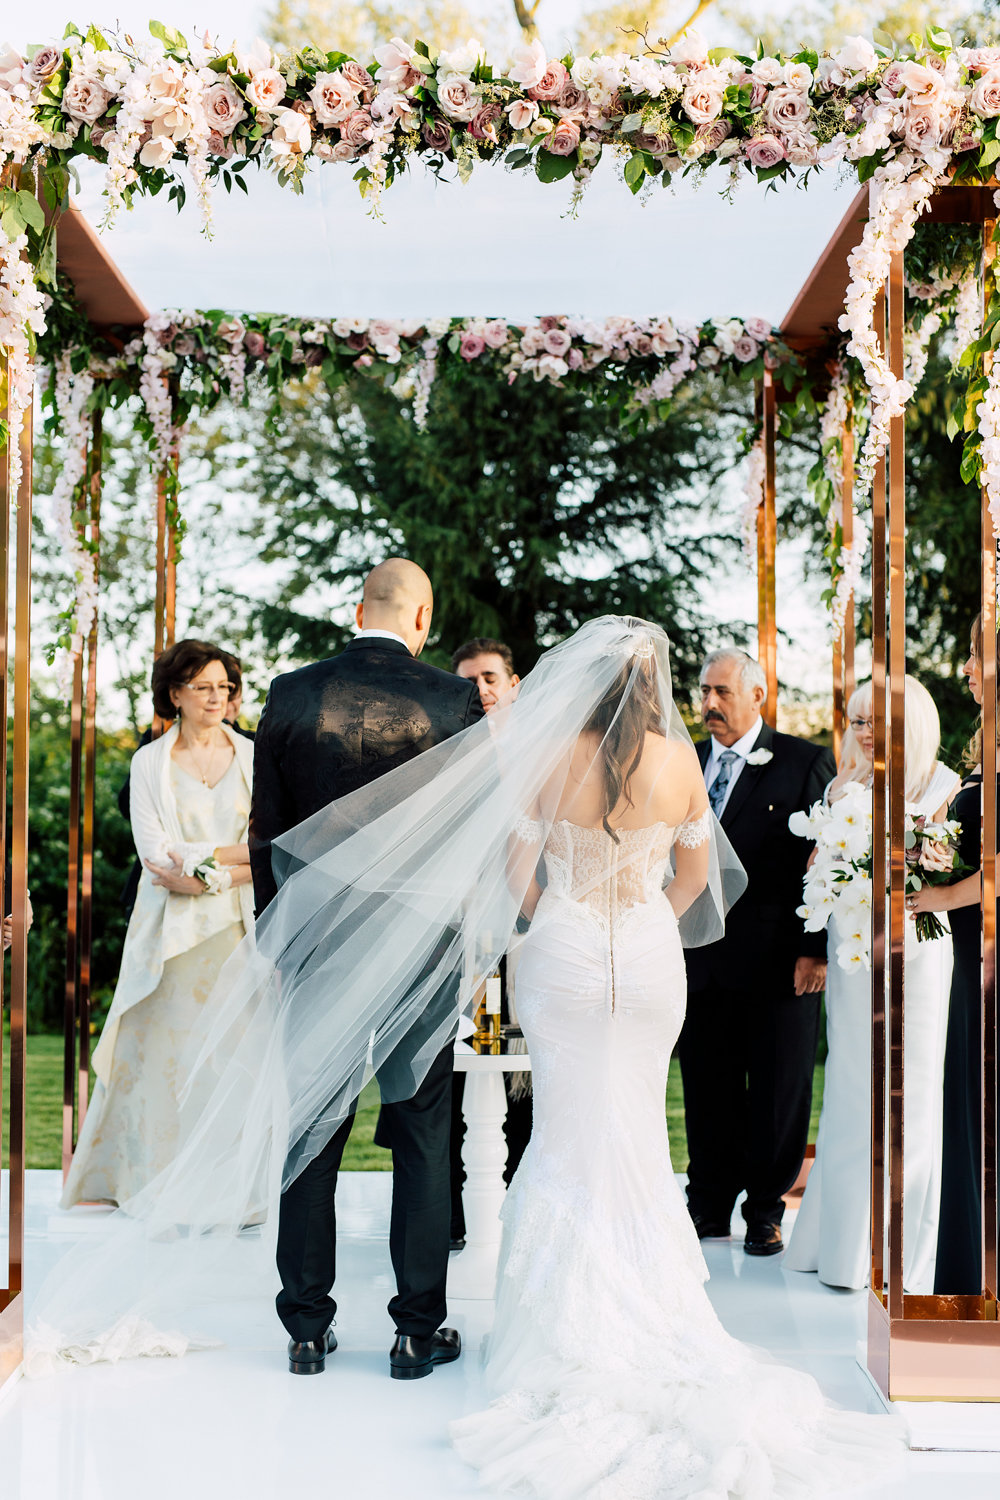 Outdoor wedding ceremony with blush roses archway